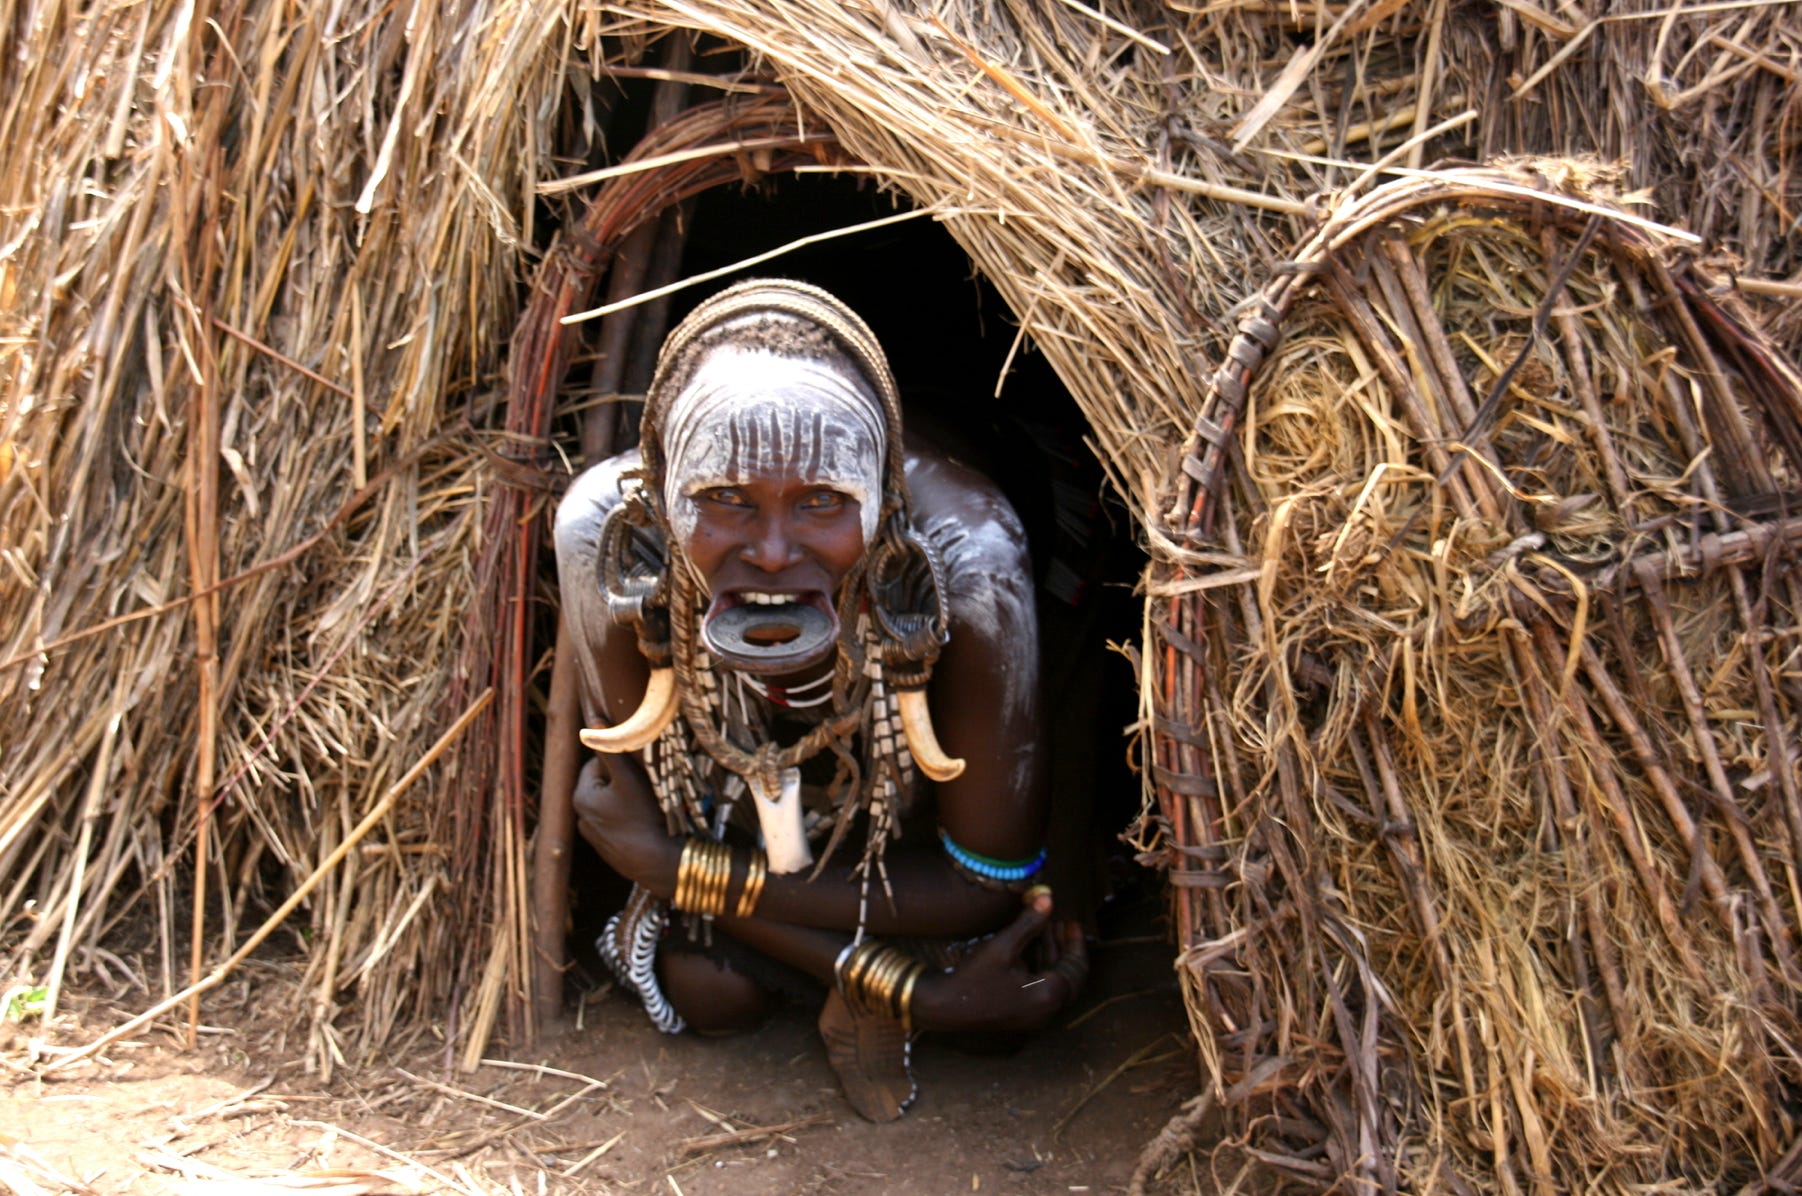 A resident in a Mursi settlement in the Omo Valley of Ethiopia looks out from the front of her dwelling.